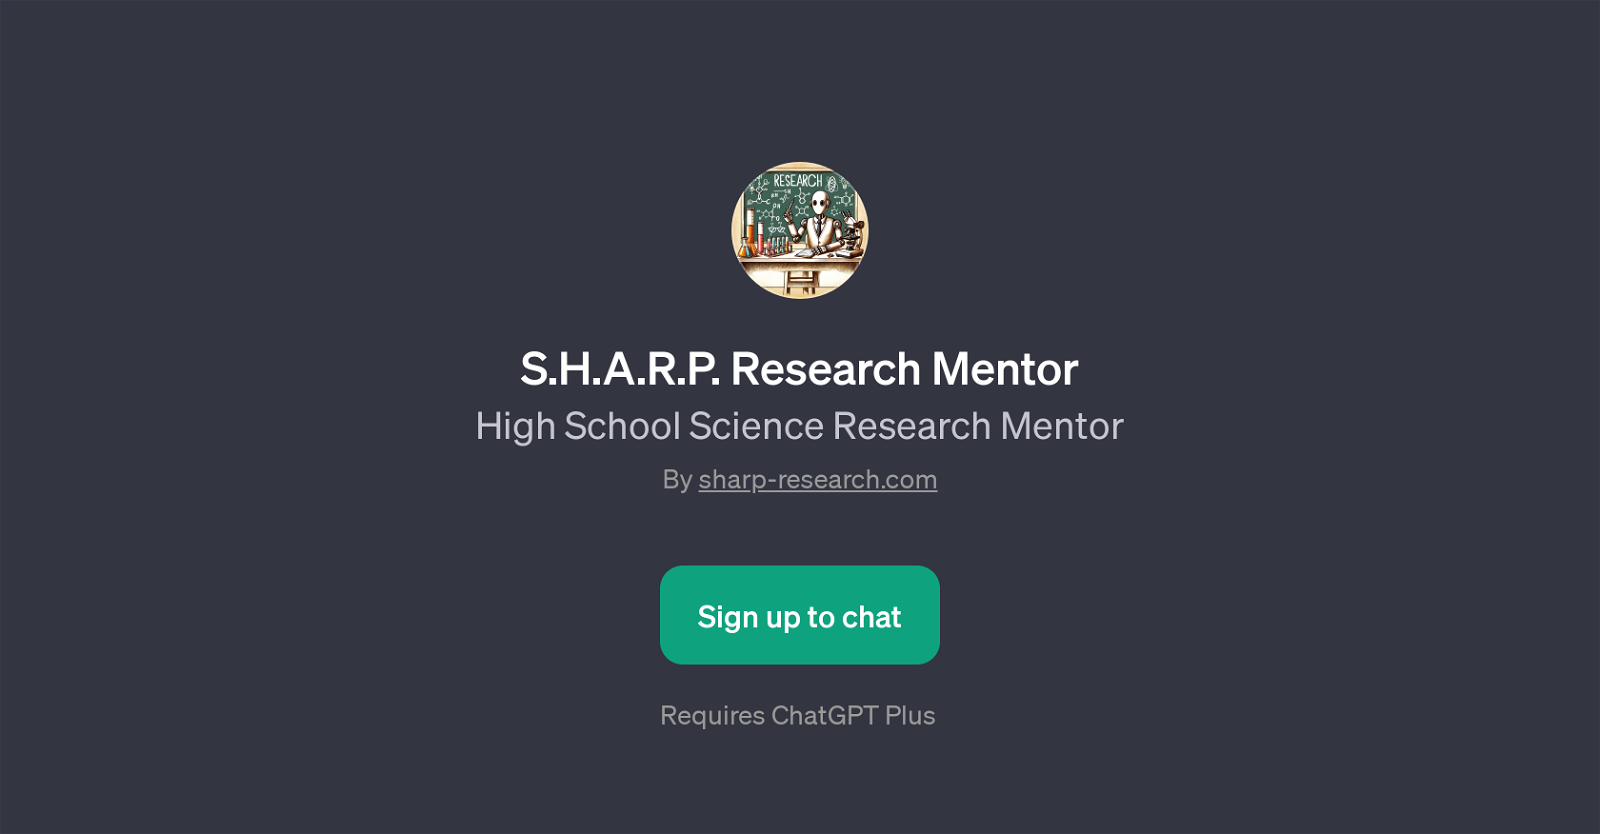 S.H.A.R.P. Research Mentor website